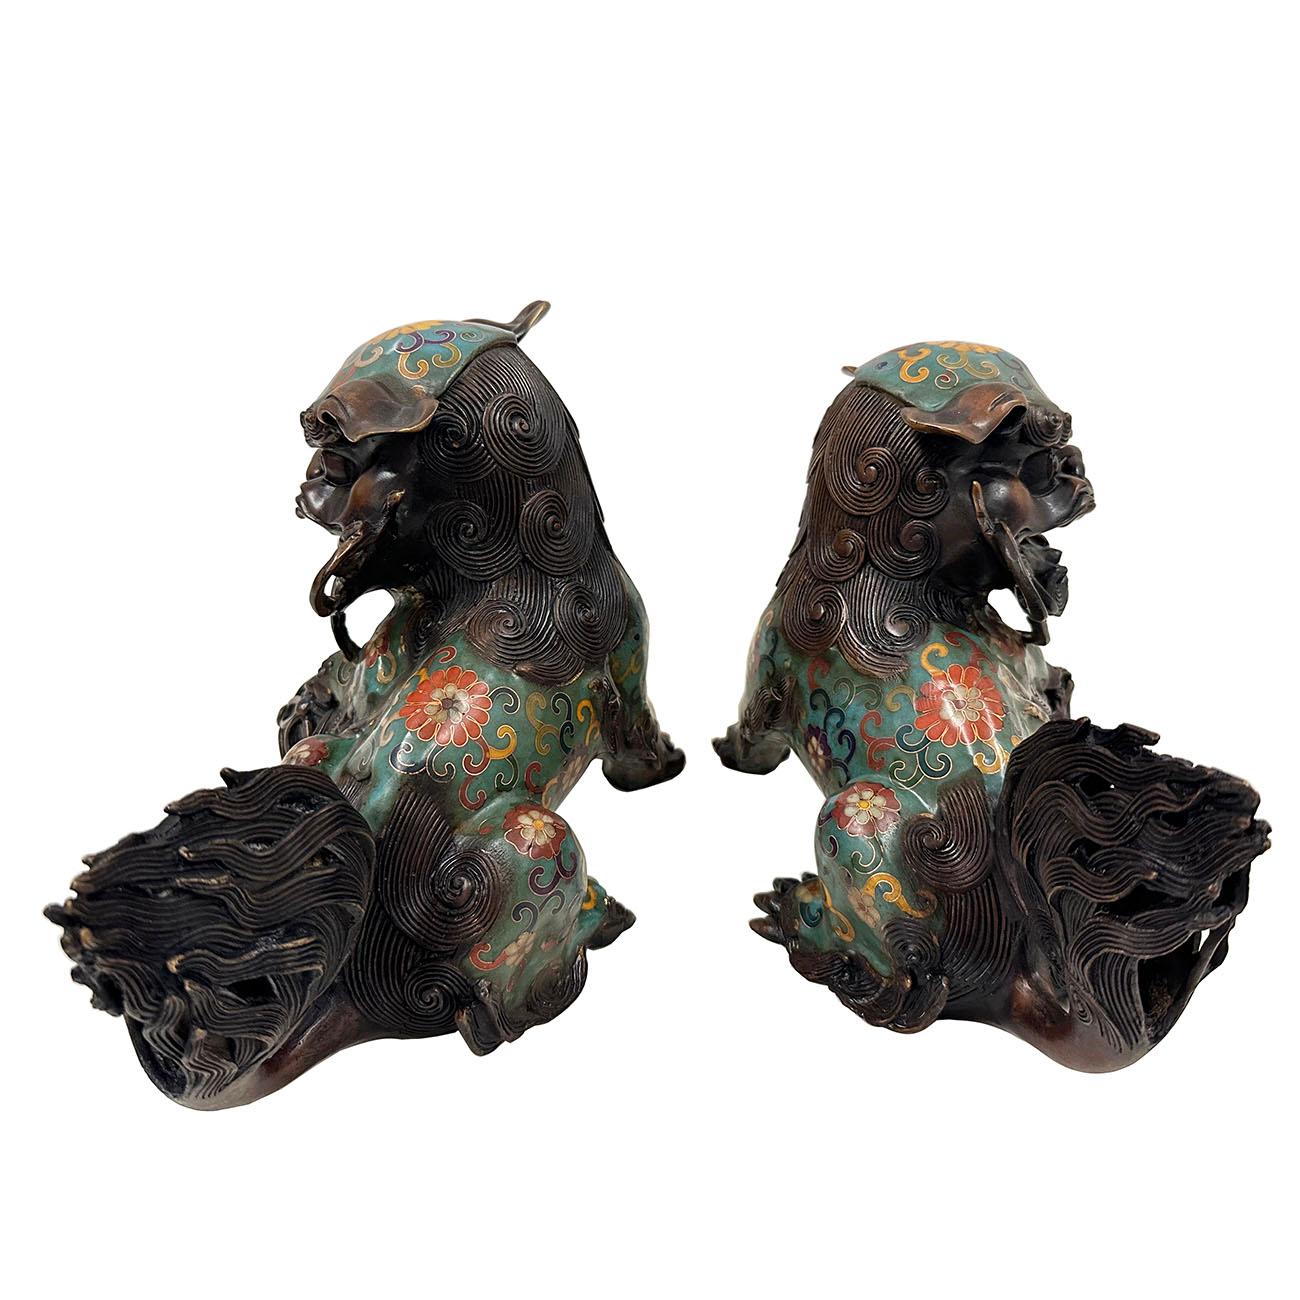 Cloissoné Early 20th Century Chinese Hand Made Cloisonne Foo Dog Statuary - Pair